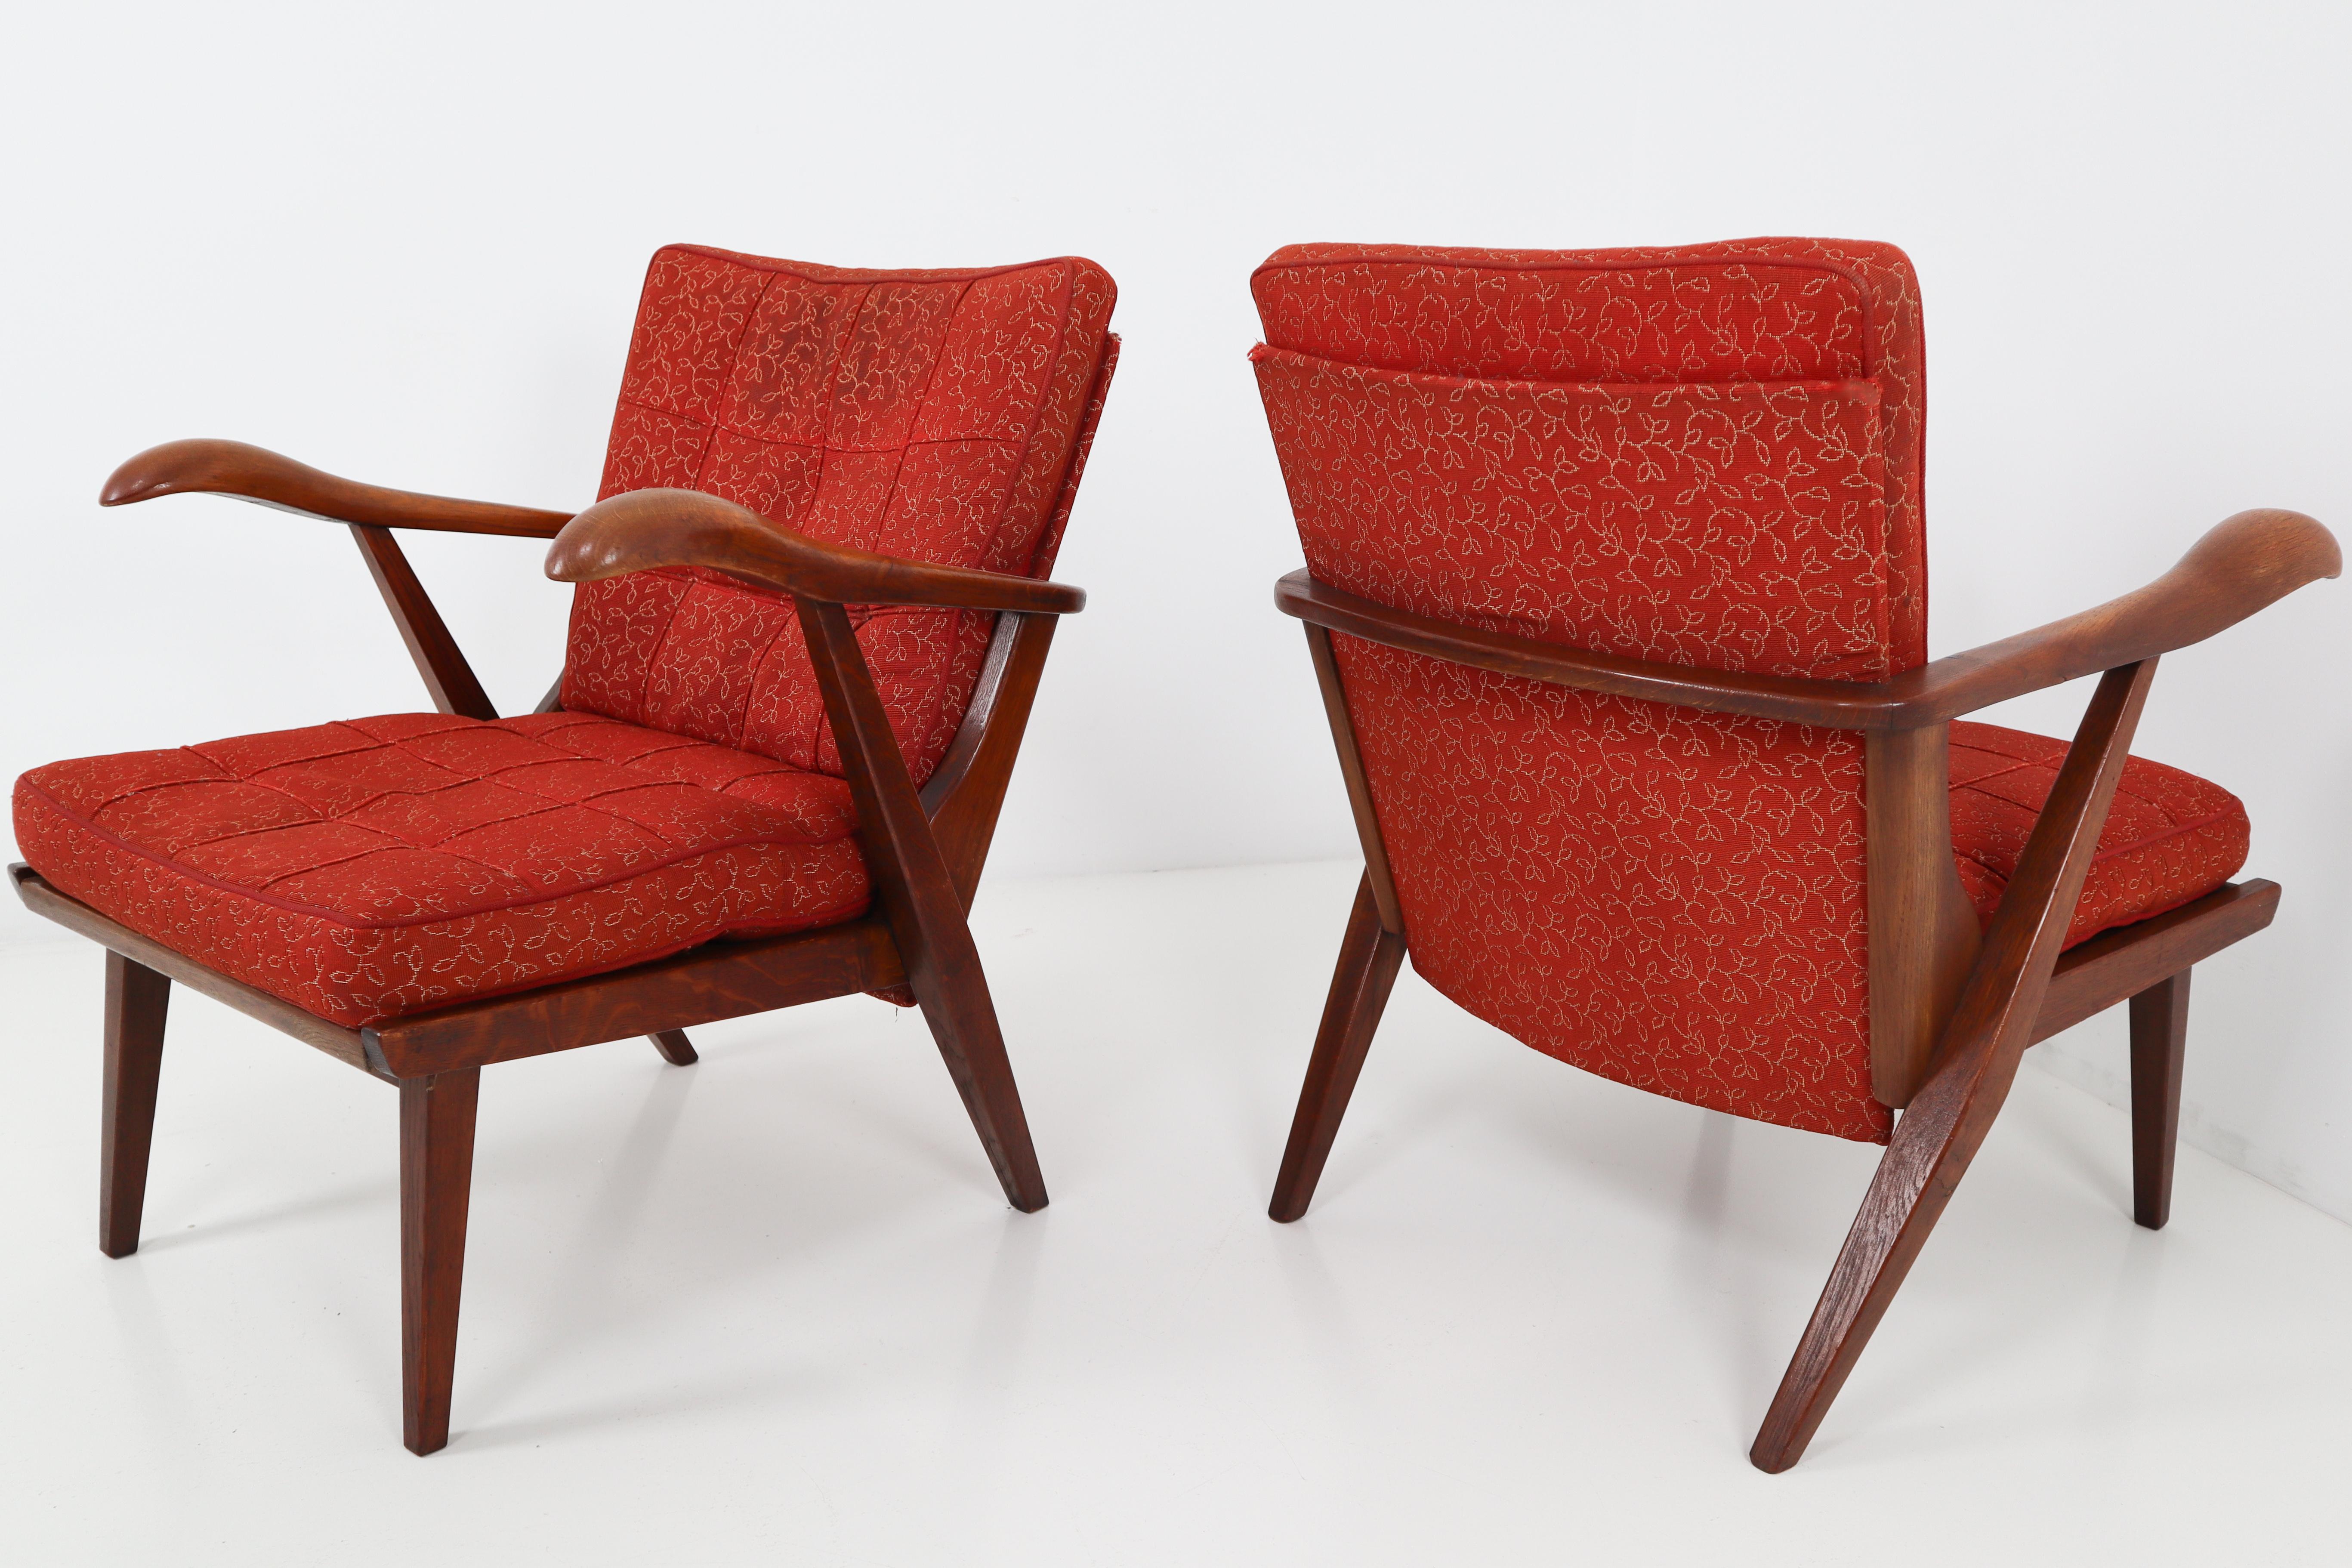 Mid-Century Modern Pair of Lounge Chairs with Sculptural Oak Wooden Frame Czech Republic, 1950s